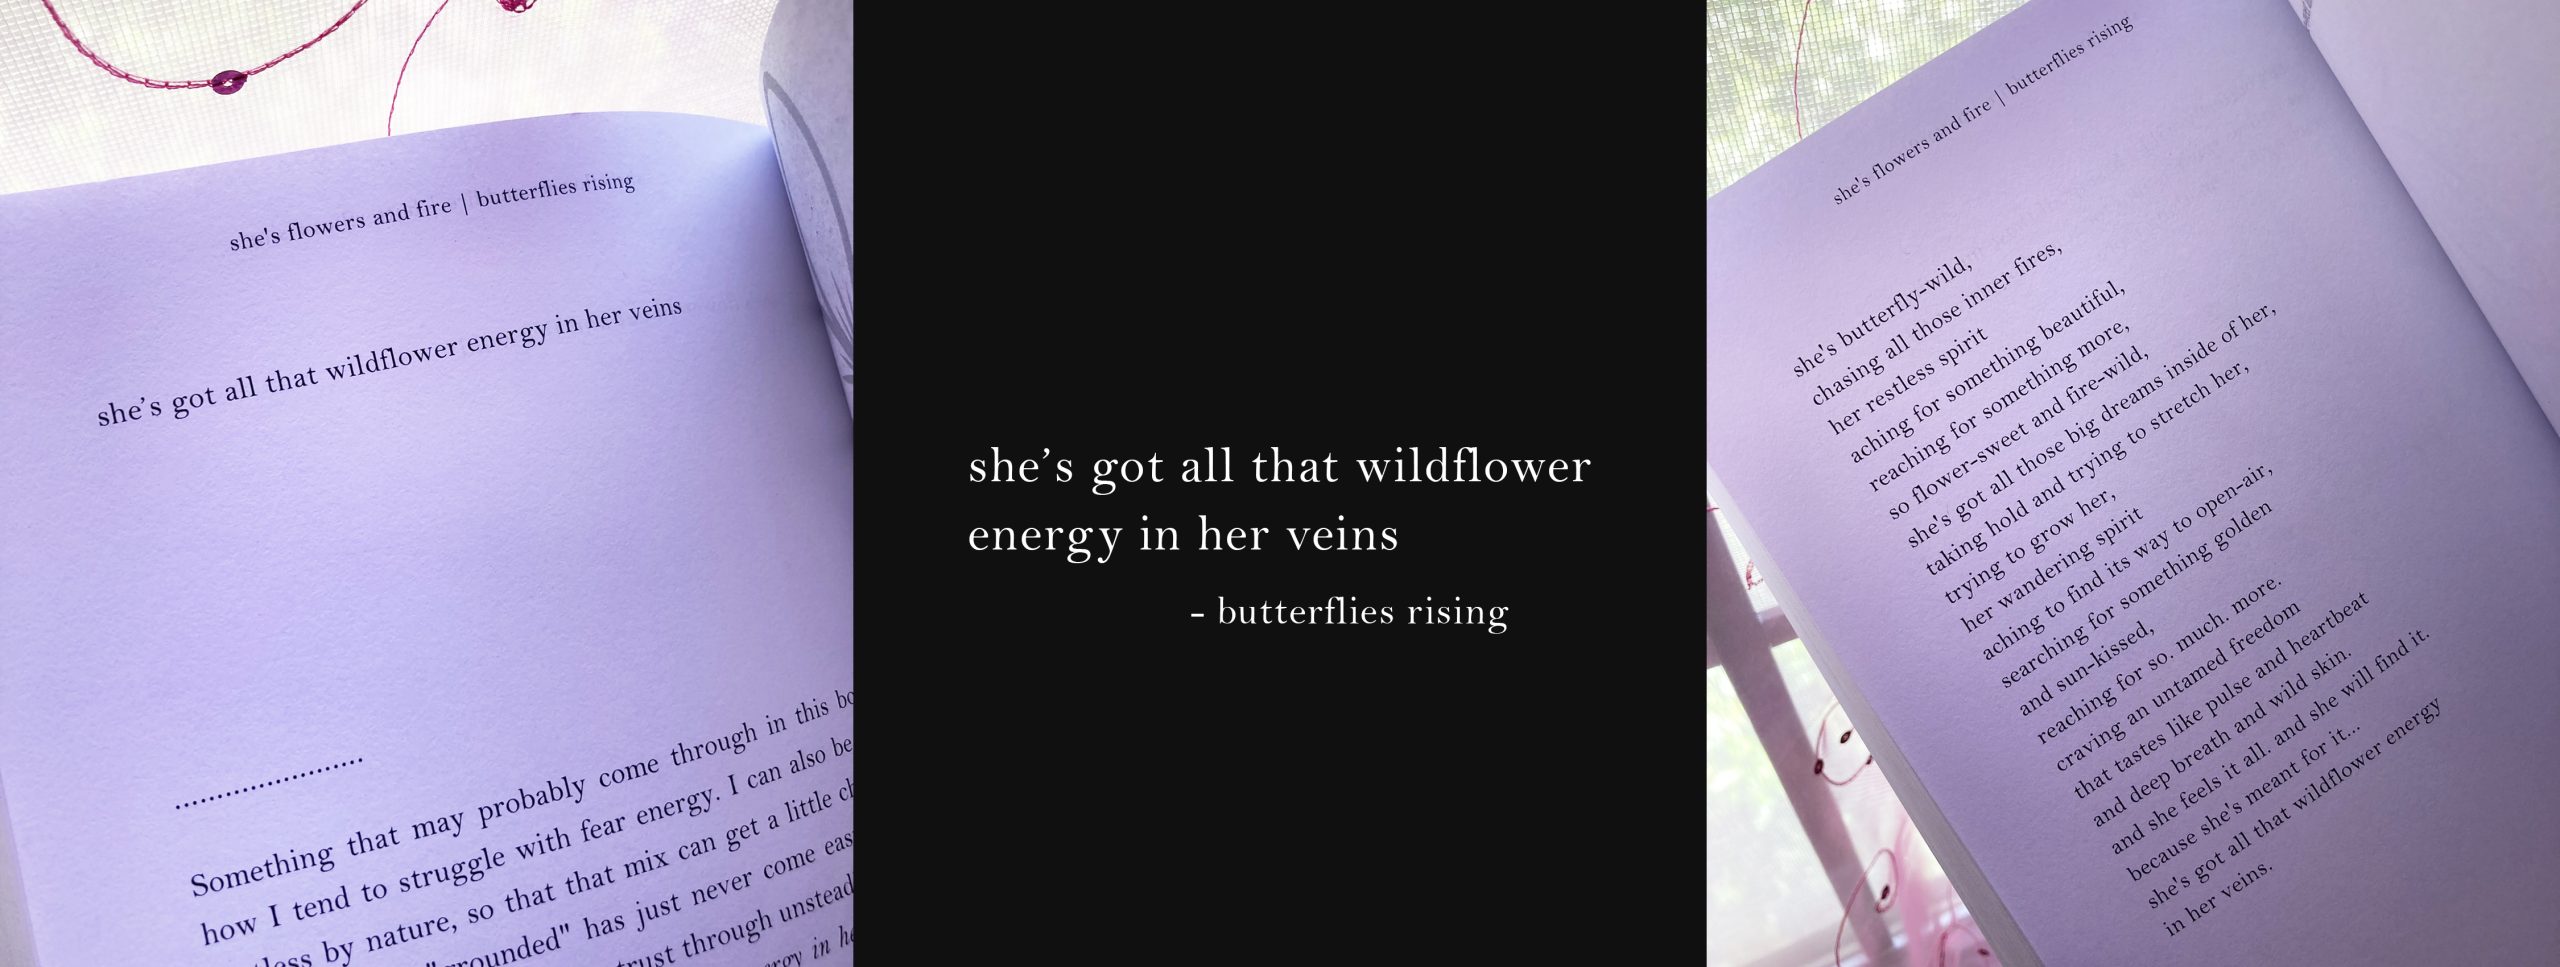 she’s got all that wildflower energy in her veins - butterflies rising